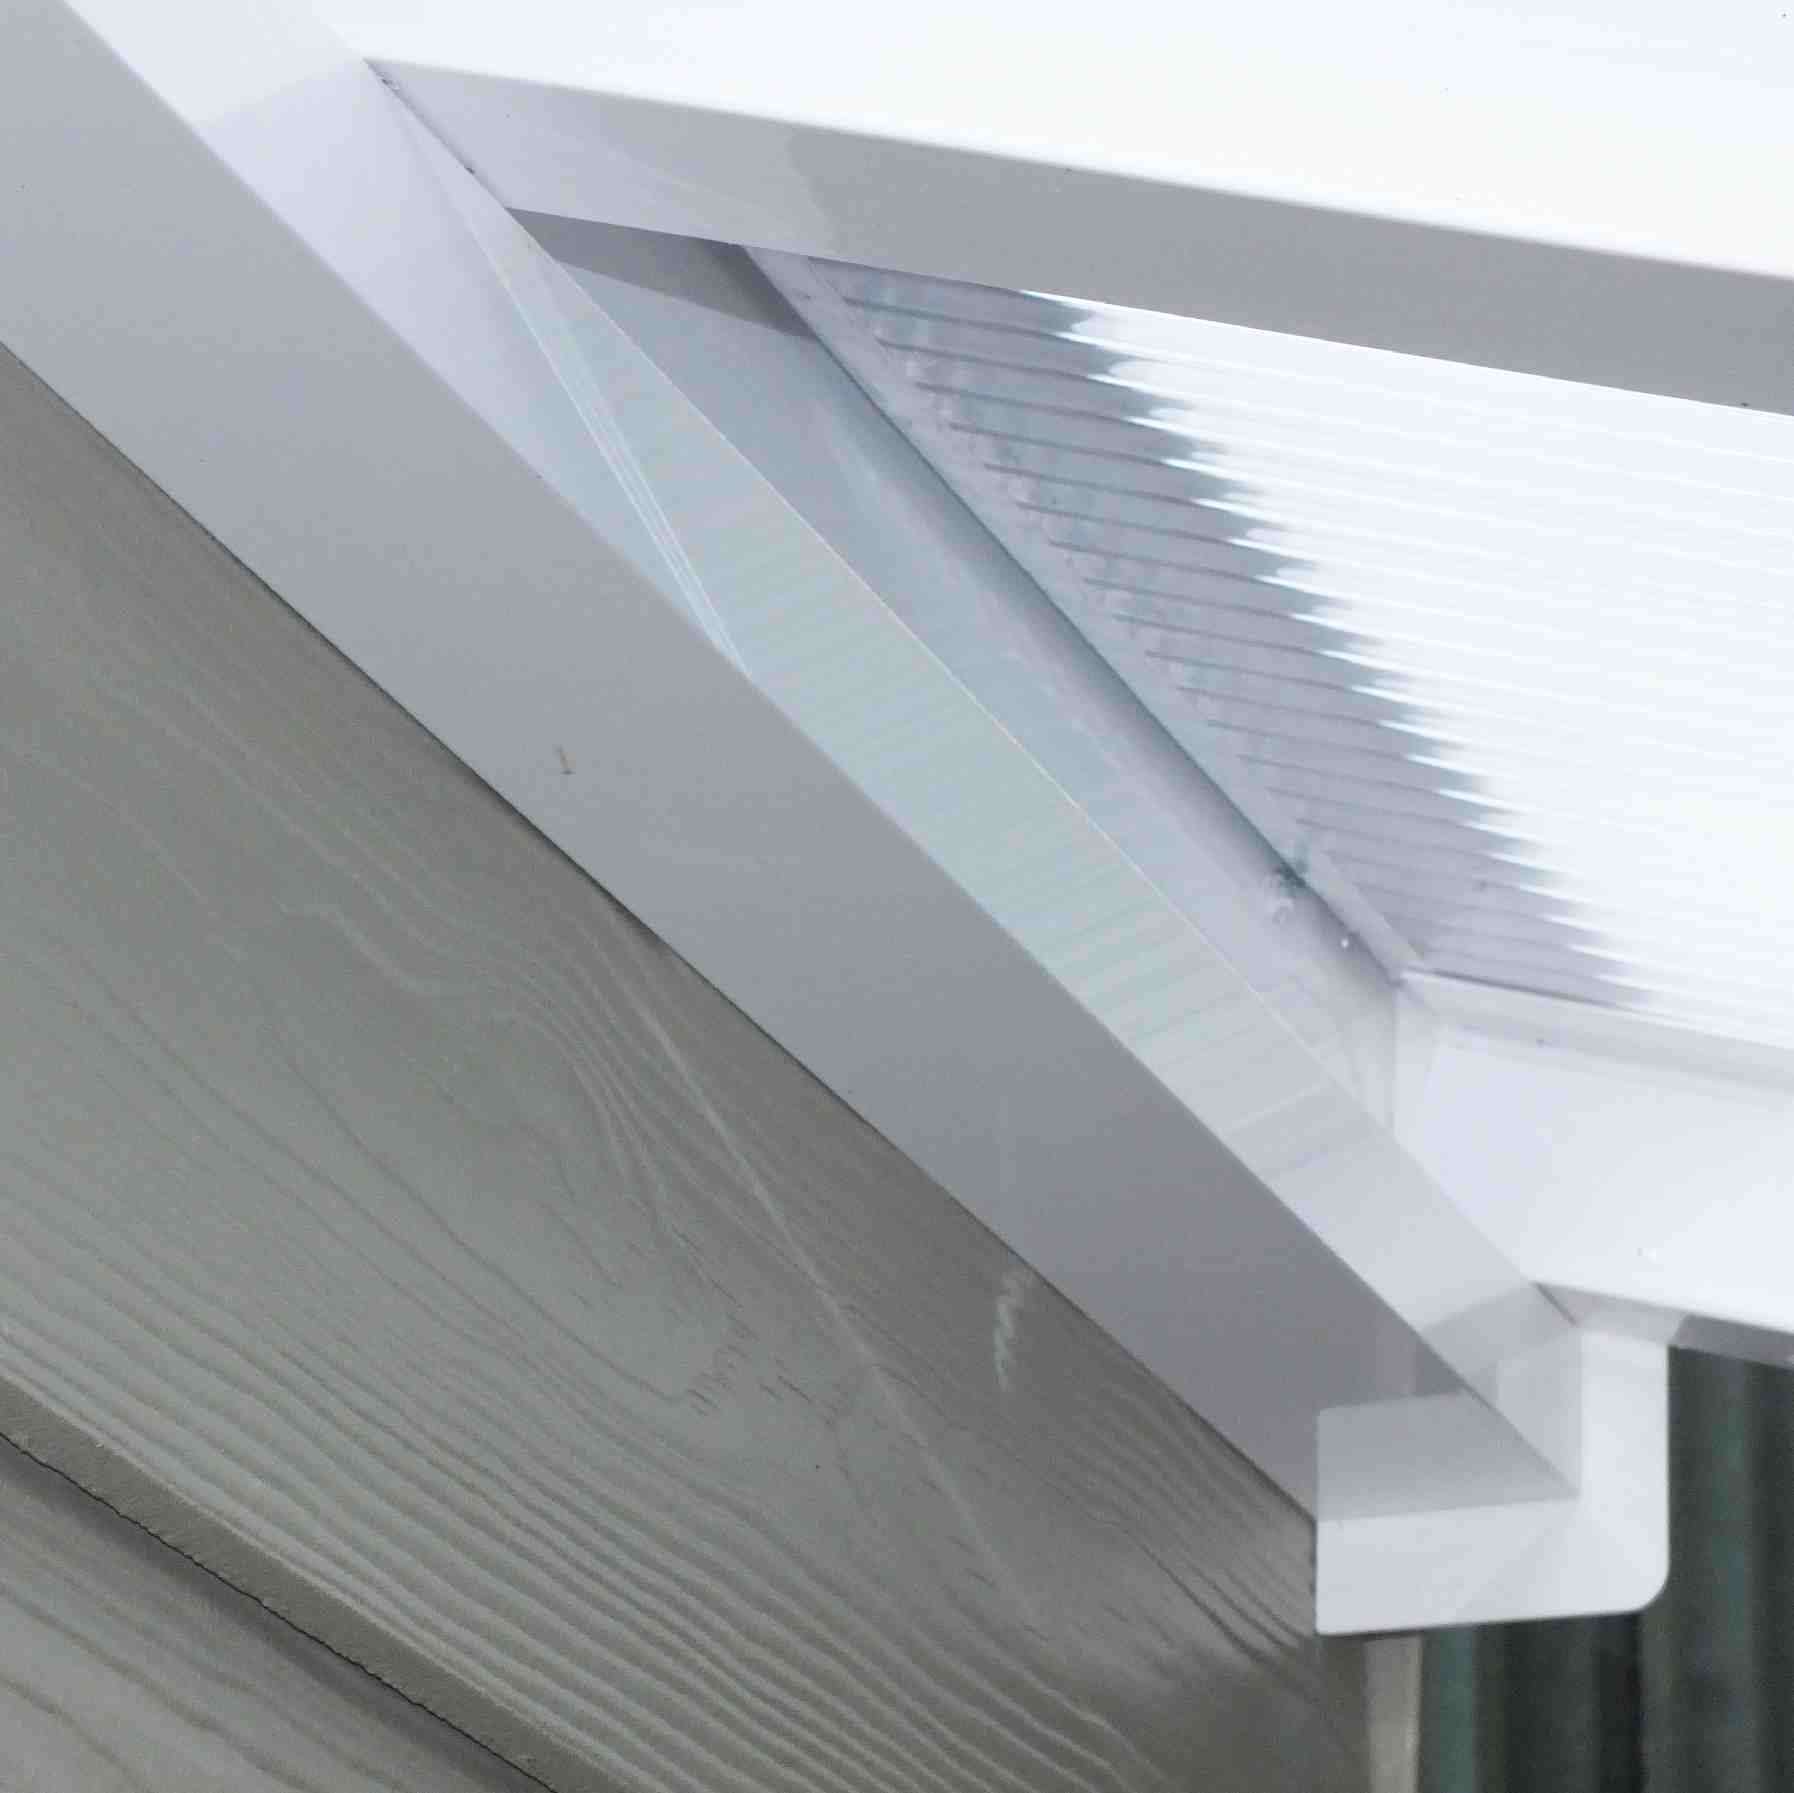 Great deals on Omega Verandah White with 16mm Polycarbonate Glazing - 6.3m (W) x 2.0m (P), (4) Supporting Posts